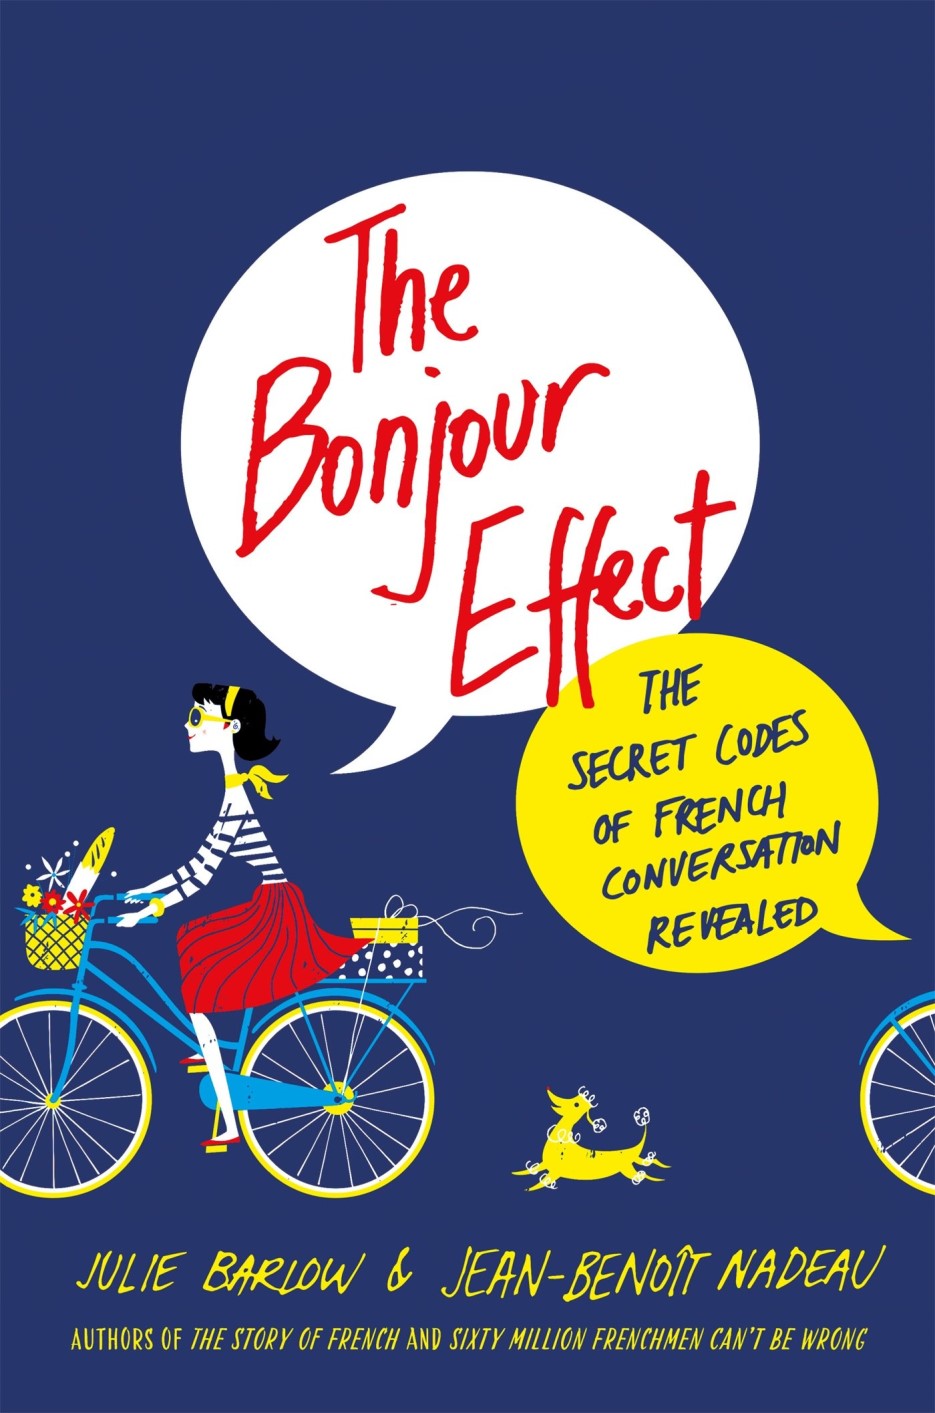 The Bonjour Effect book cover by Jean-Benoît Nadeau and Julie Barlow